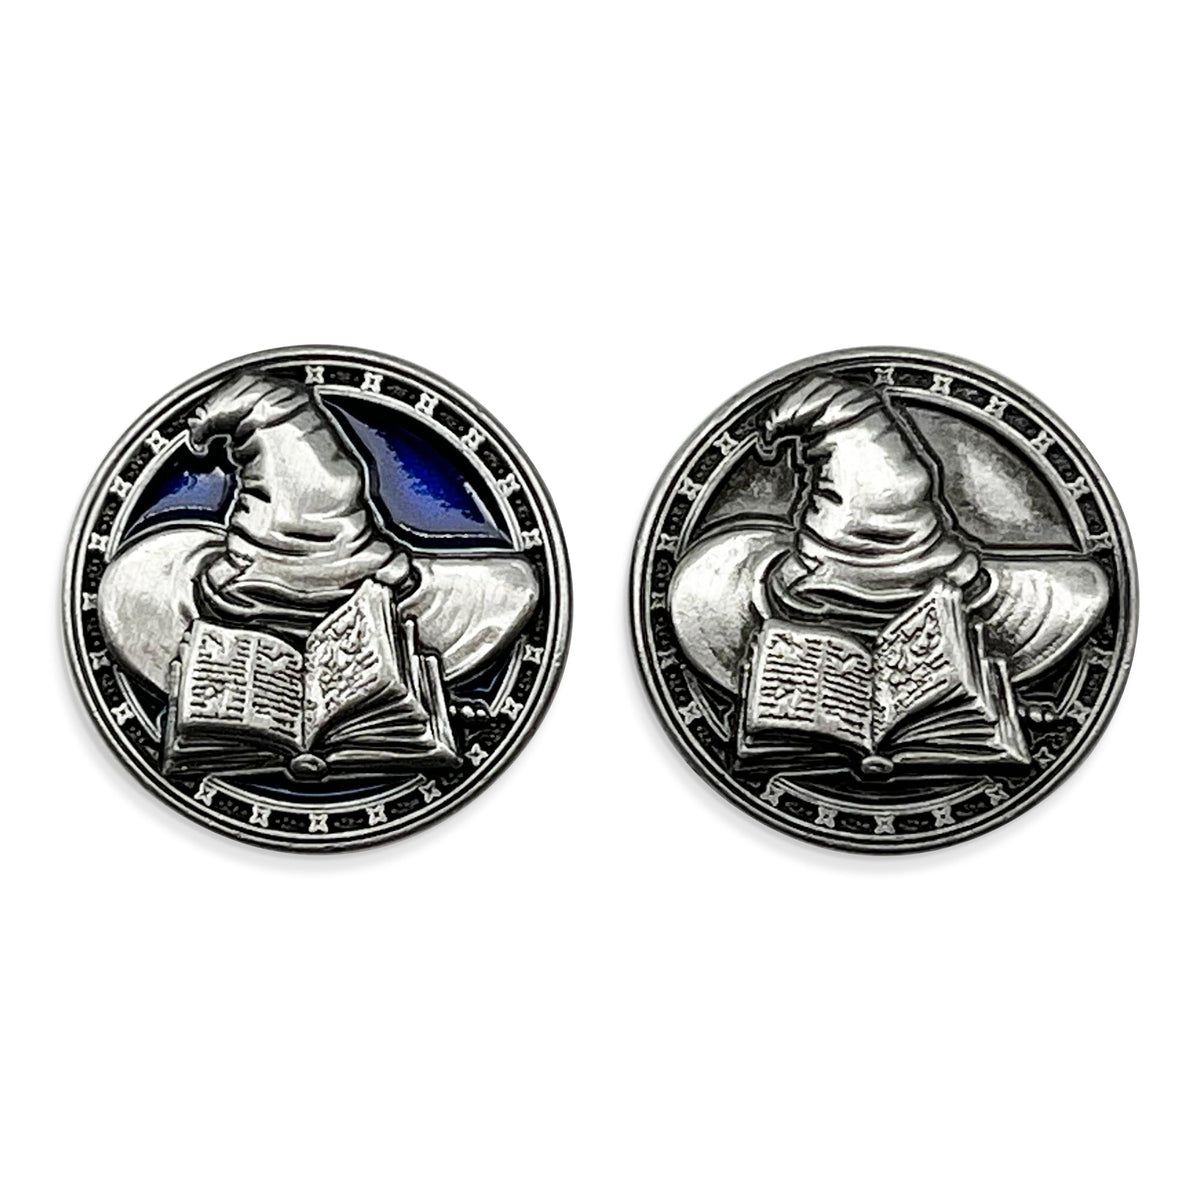 Profession Coins - Wizard Metal Coins Set of 10 - NOR 03420